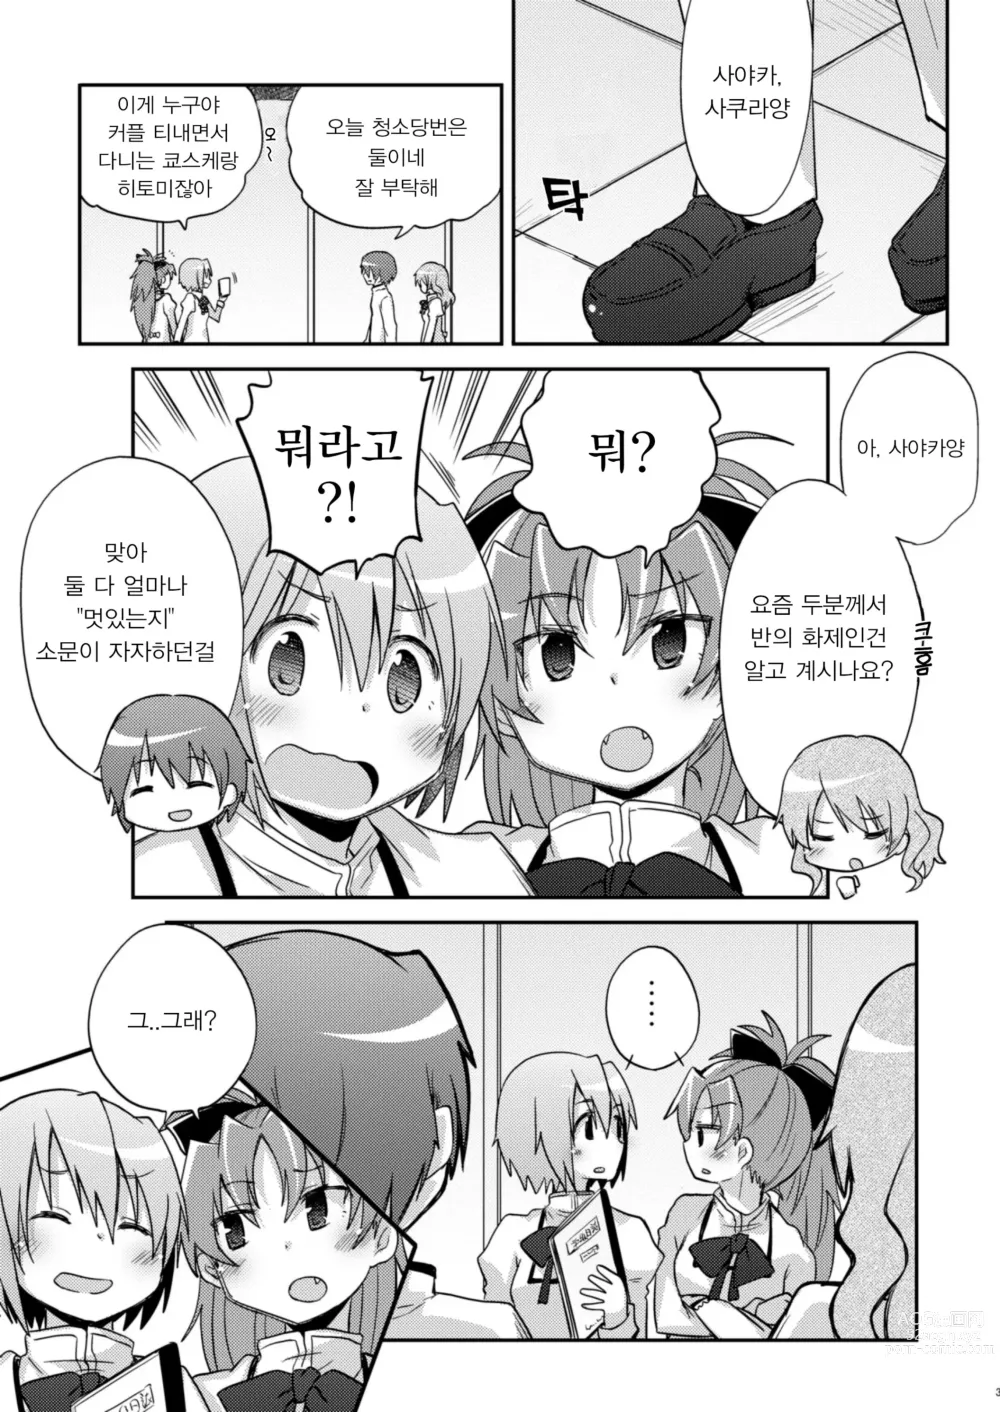 Page 2 of doujinshi 나만이 아는